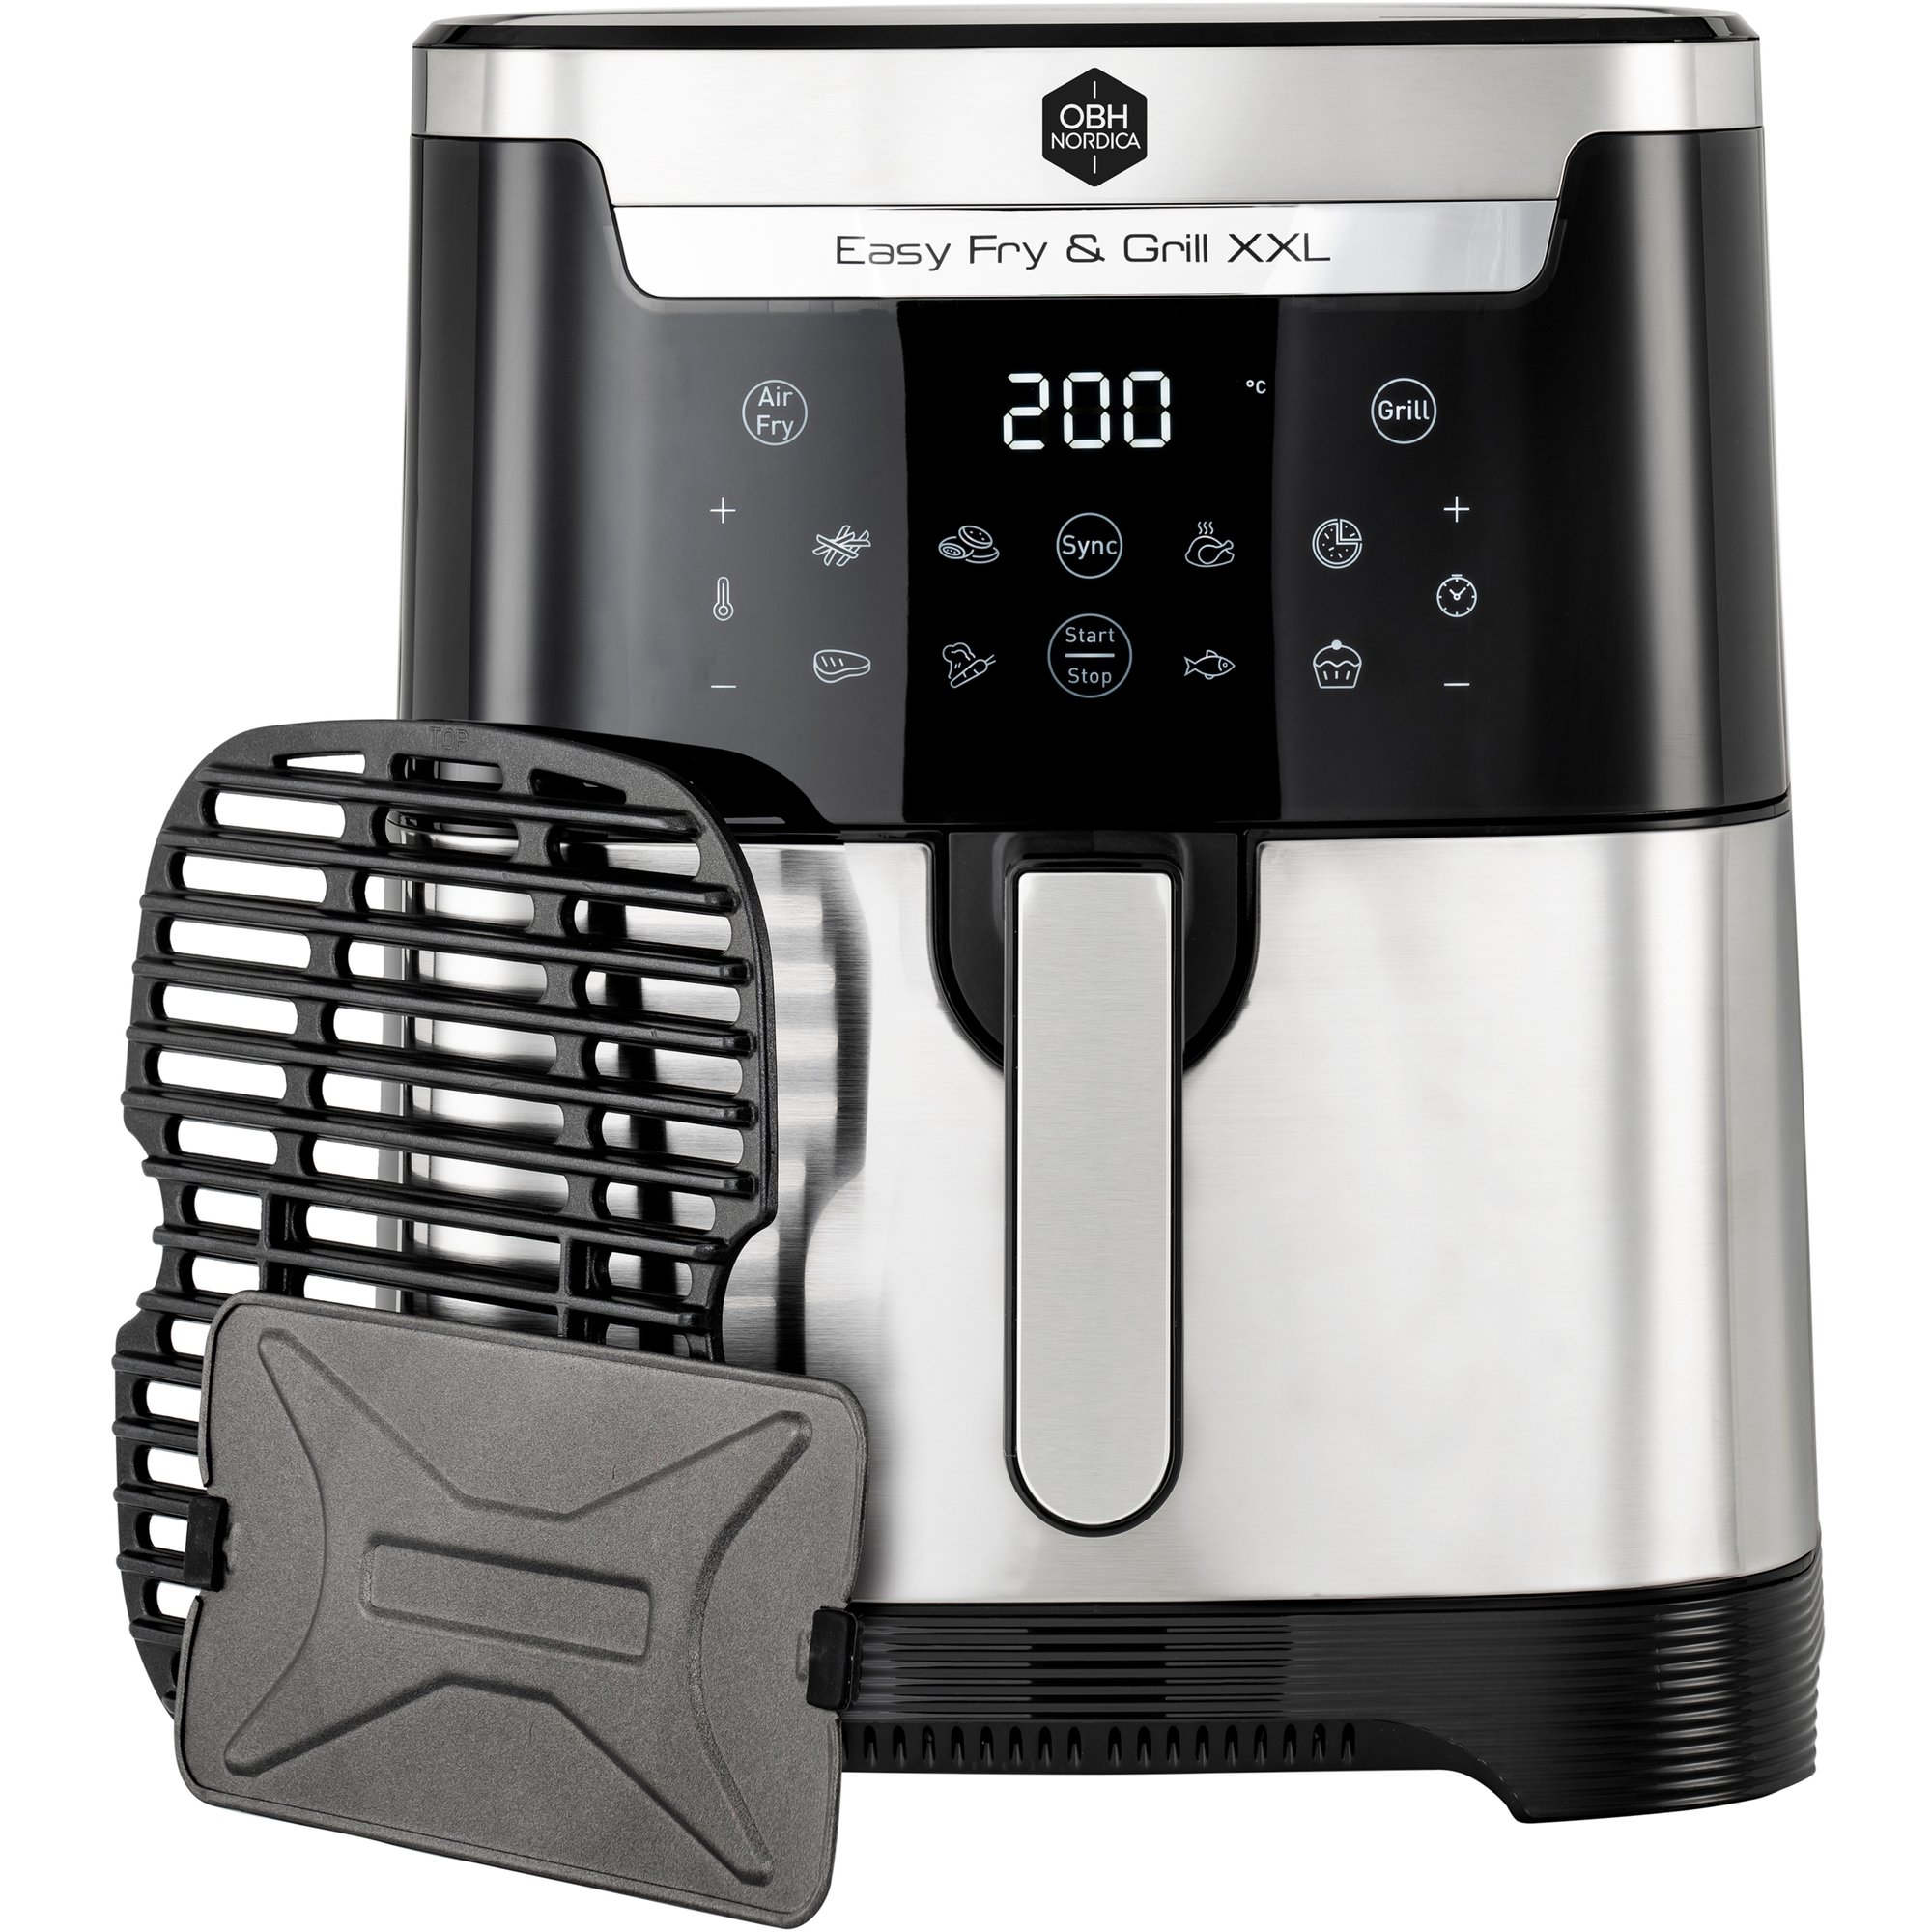 #2 - OBH Nordica Easy Fry & Grill XXL 2-in-1 airfryer, 6,5 liter